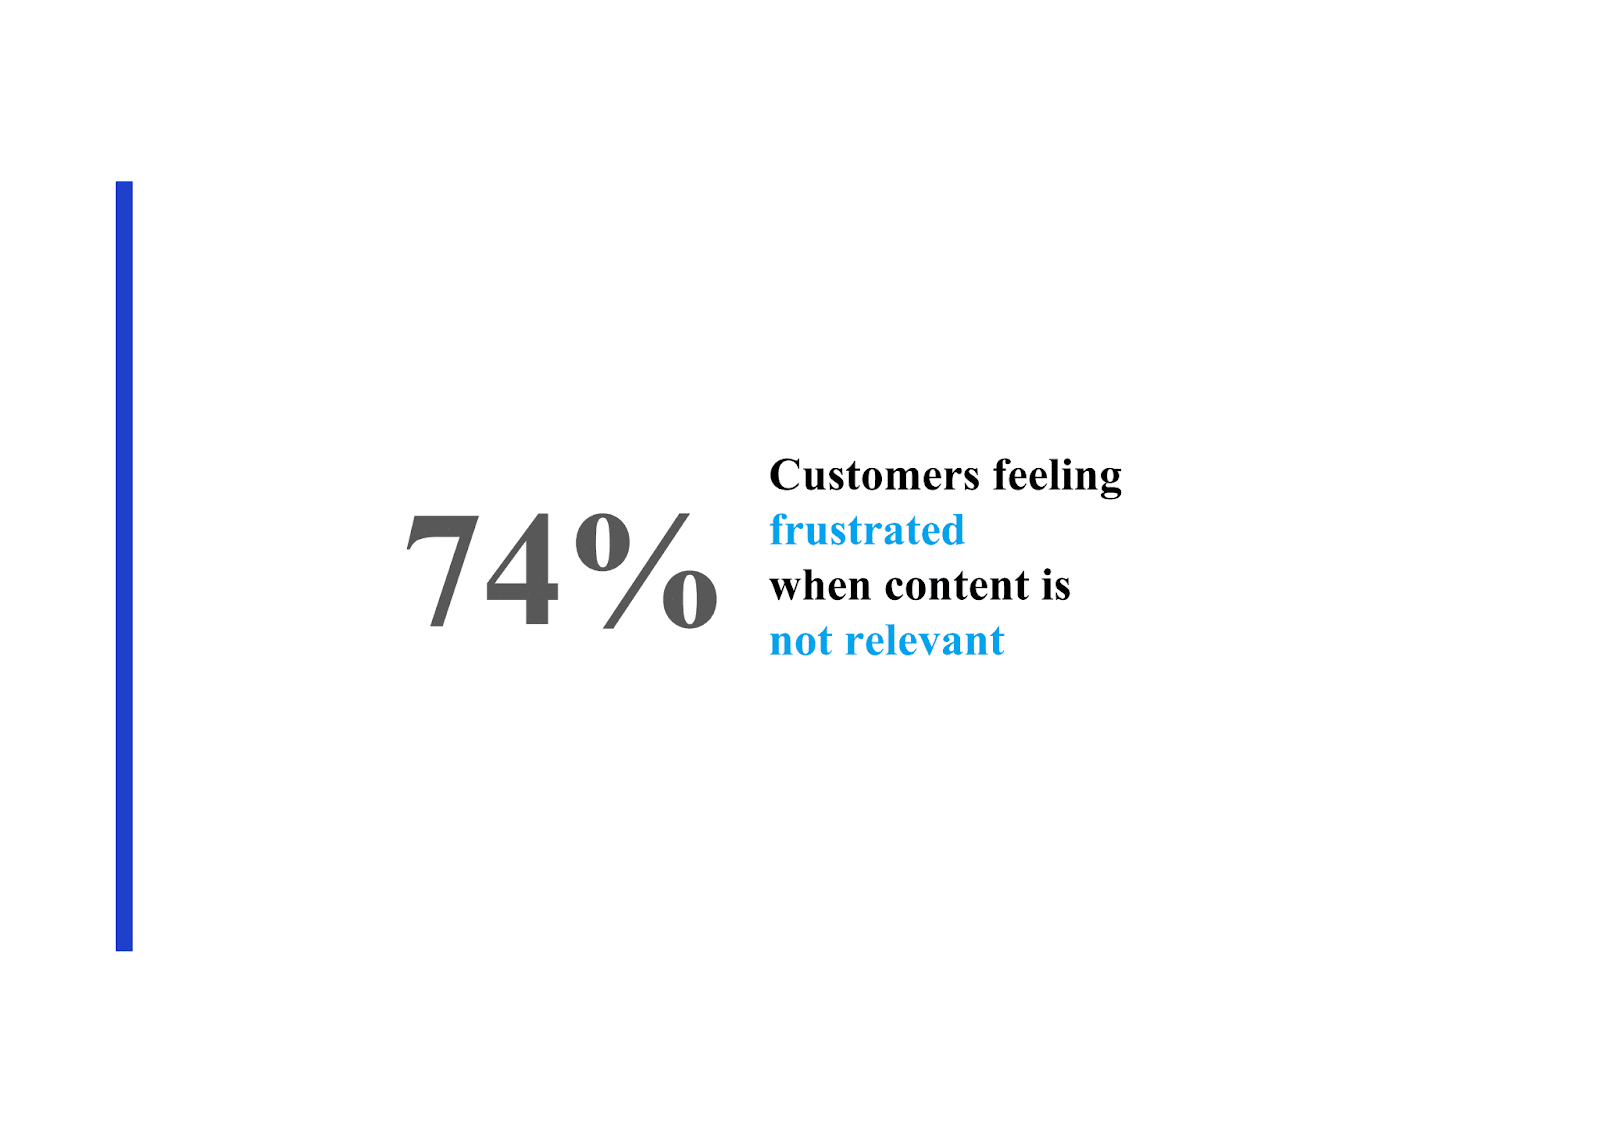 74% of customers feel frustrated when content is not relevant.